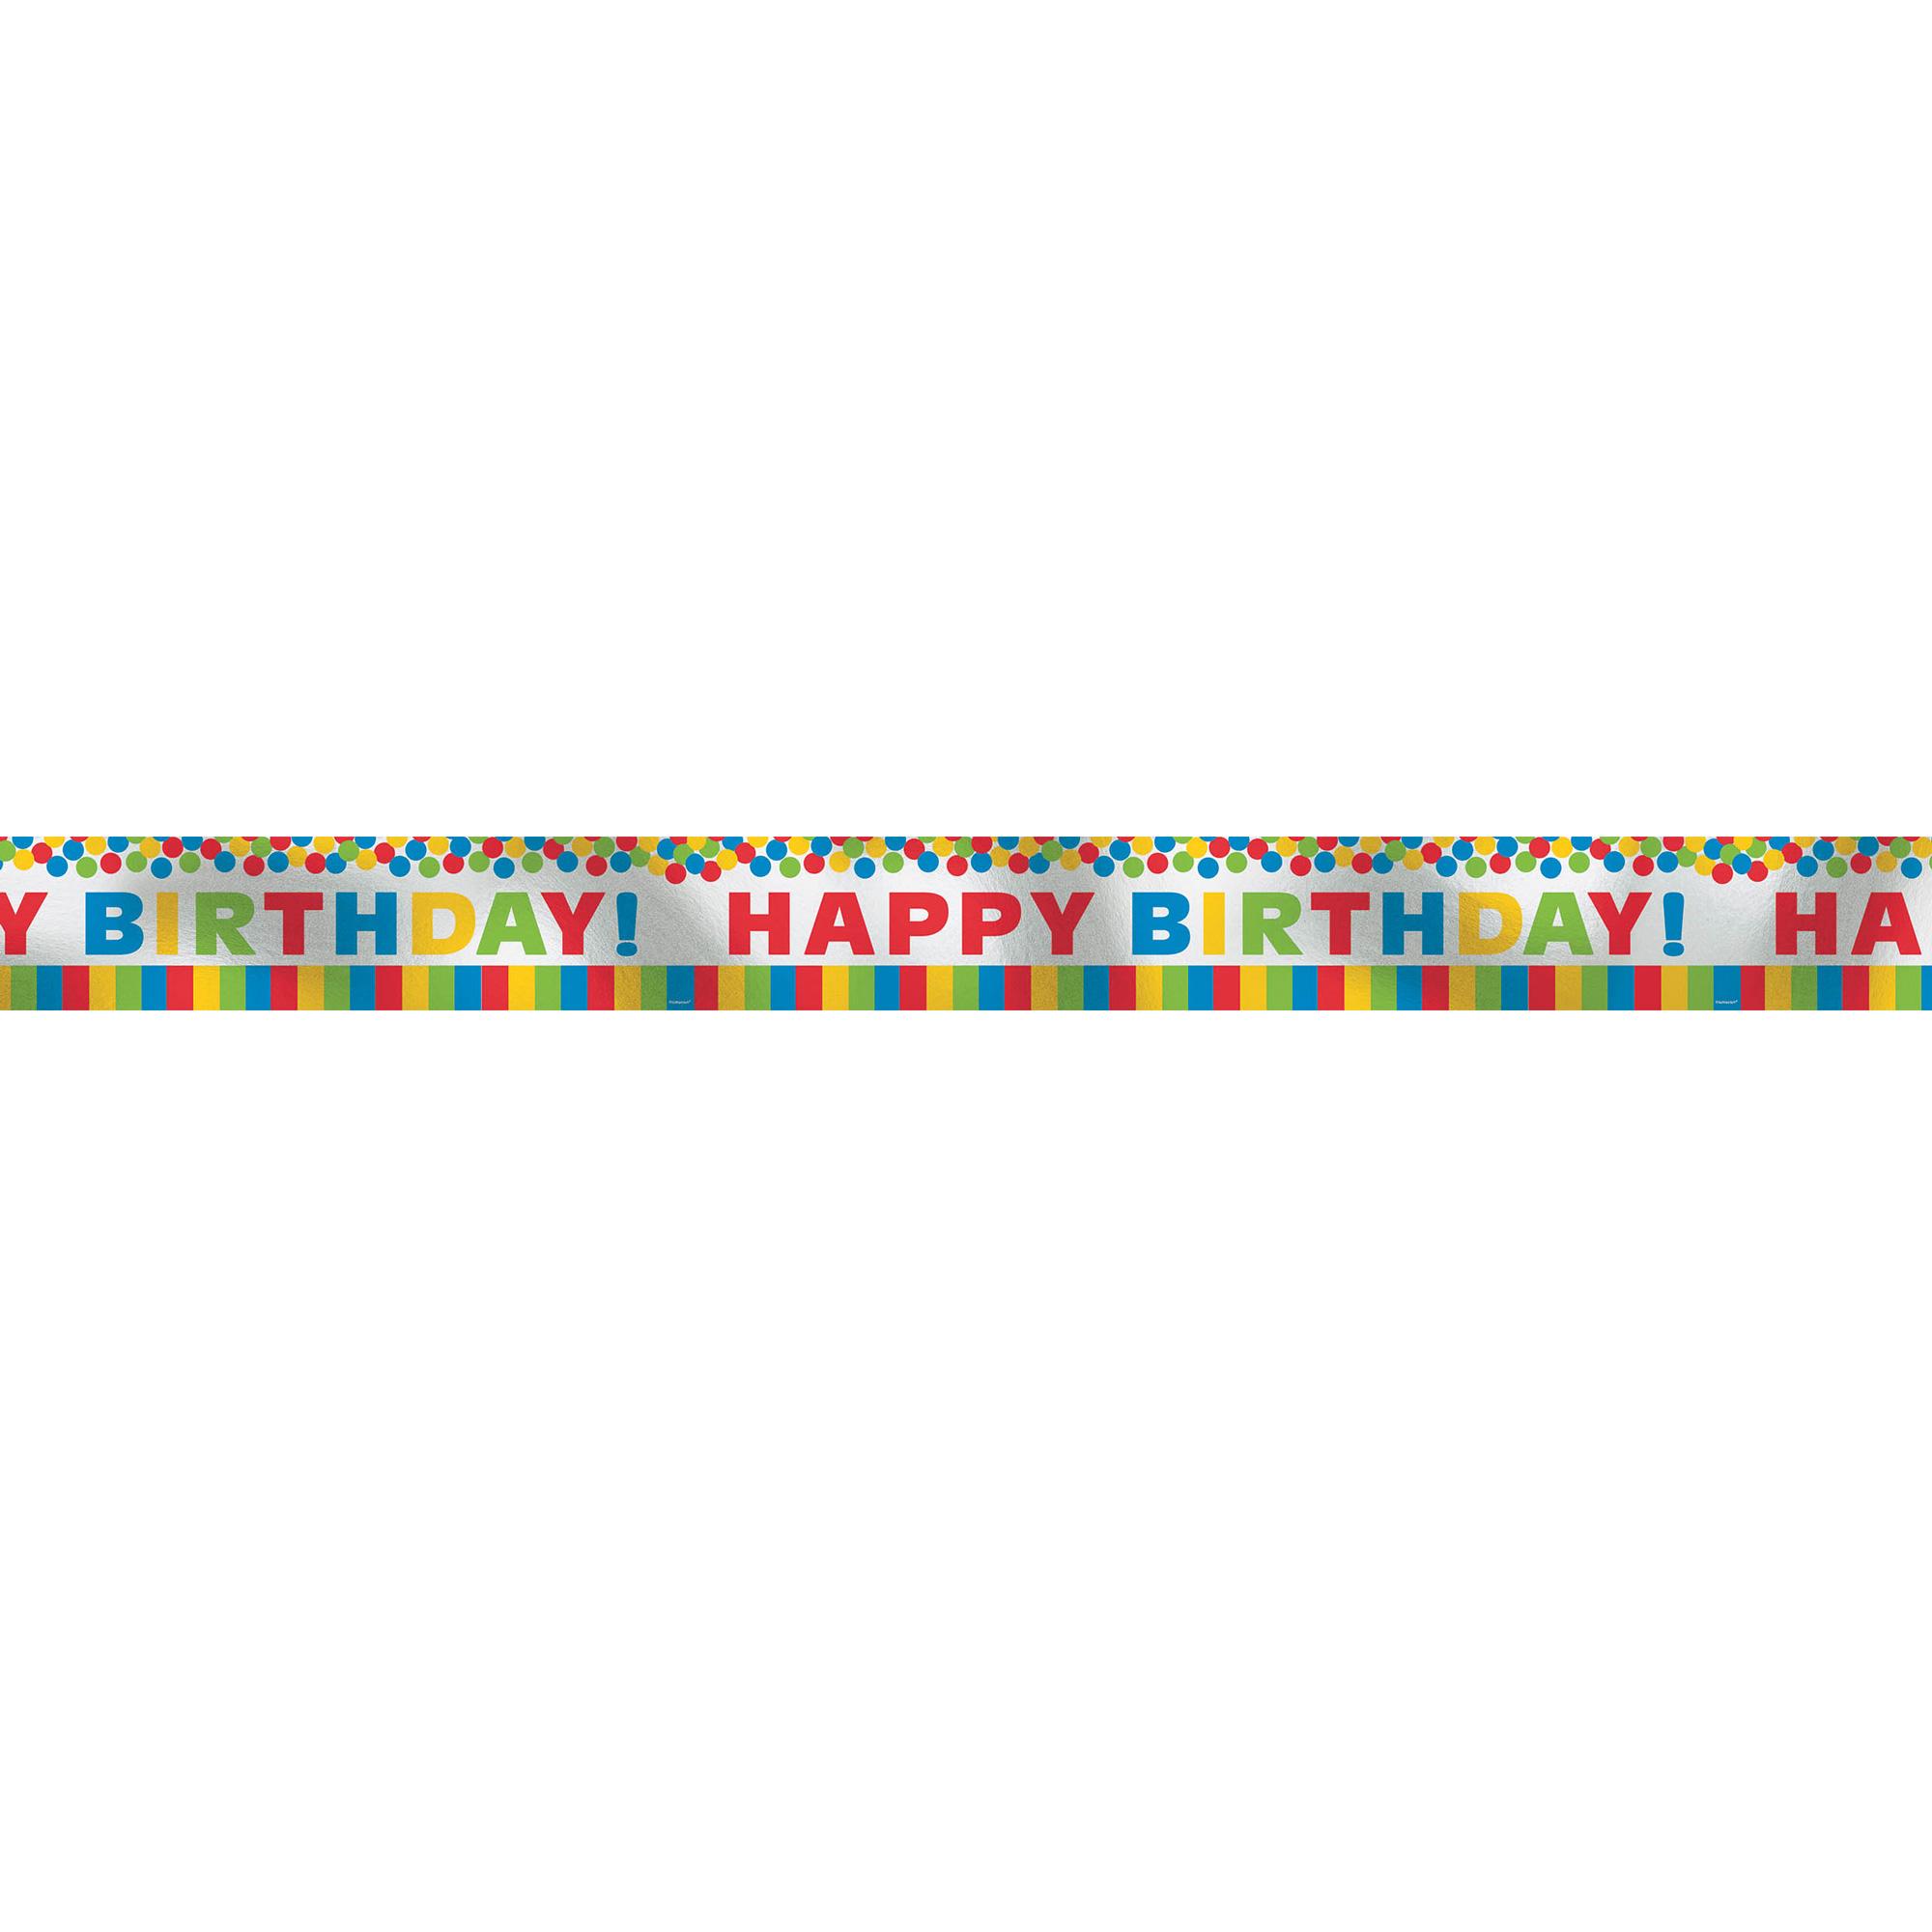 Primary Rainbow Happy Birthday Foil Banner 25ft Decorations - Party Centre - Party Centre